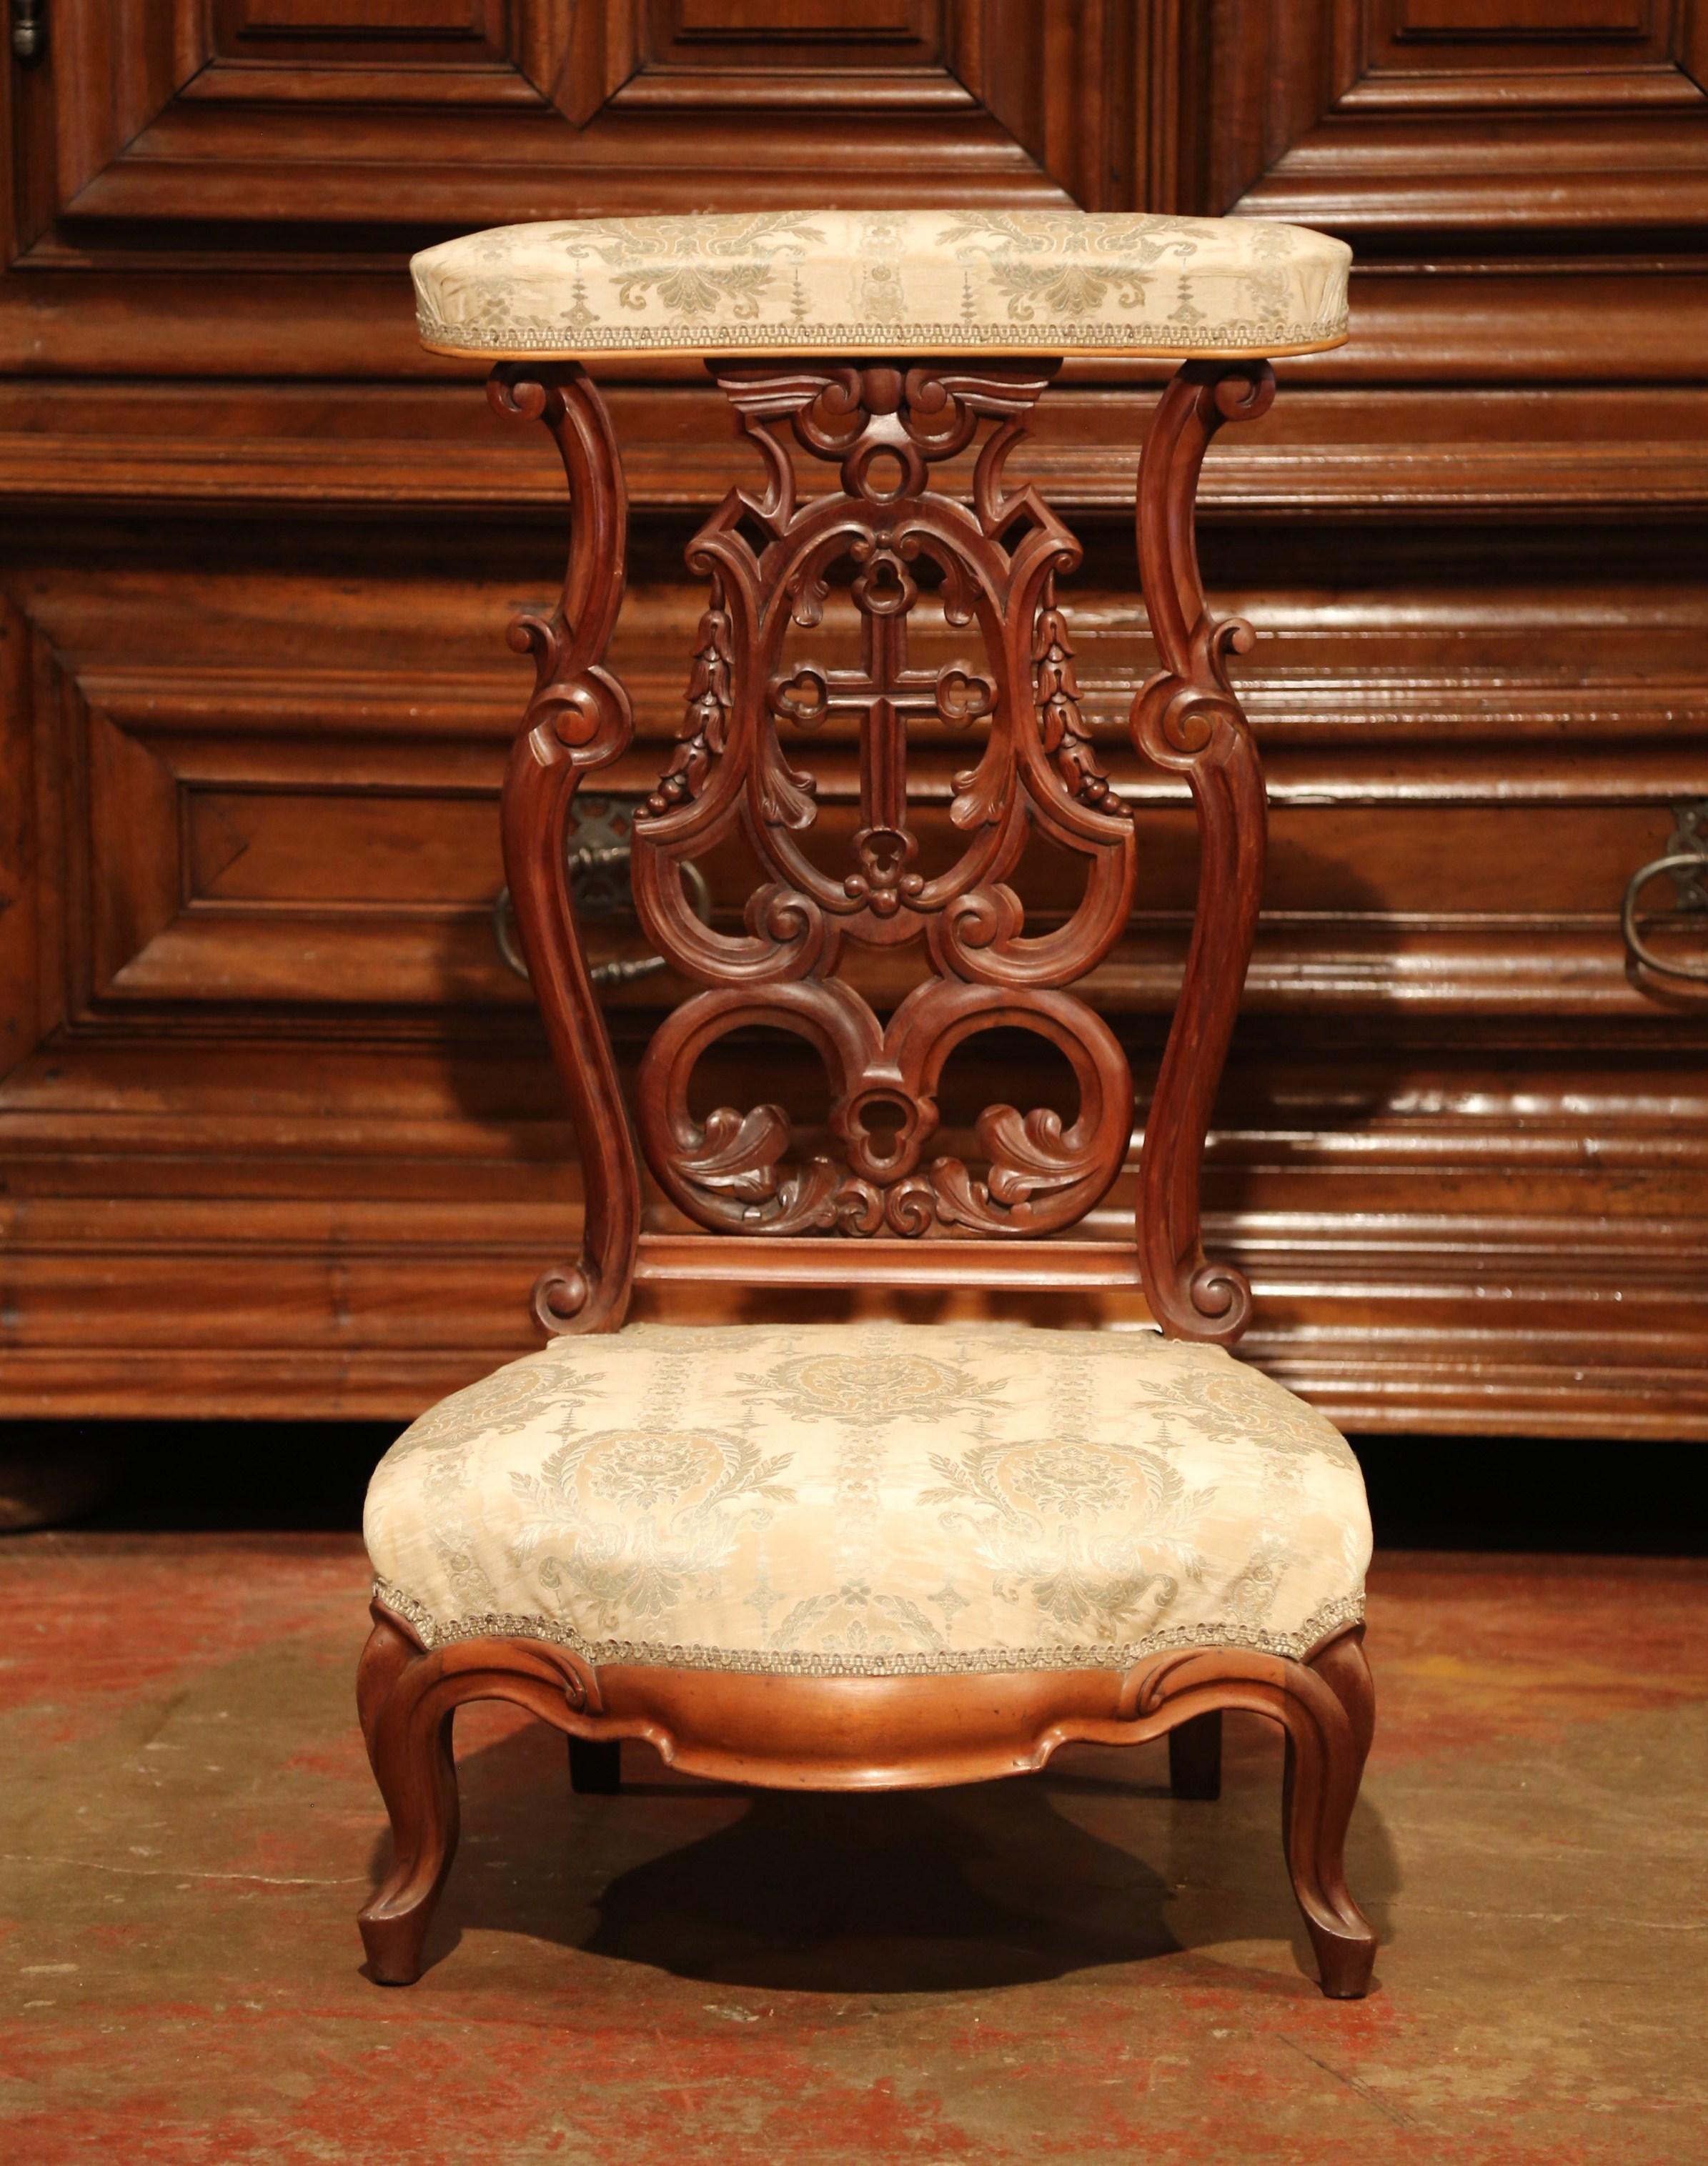 Place this elegant antique prayer chair in your bedroom for daily devotions. Crafted in France, circa 1880, the traditional, fruitwood kneeler has scroll feet, a wide, cushioned seat, and features a large, hand-carved cross further embellished with